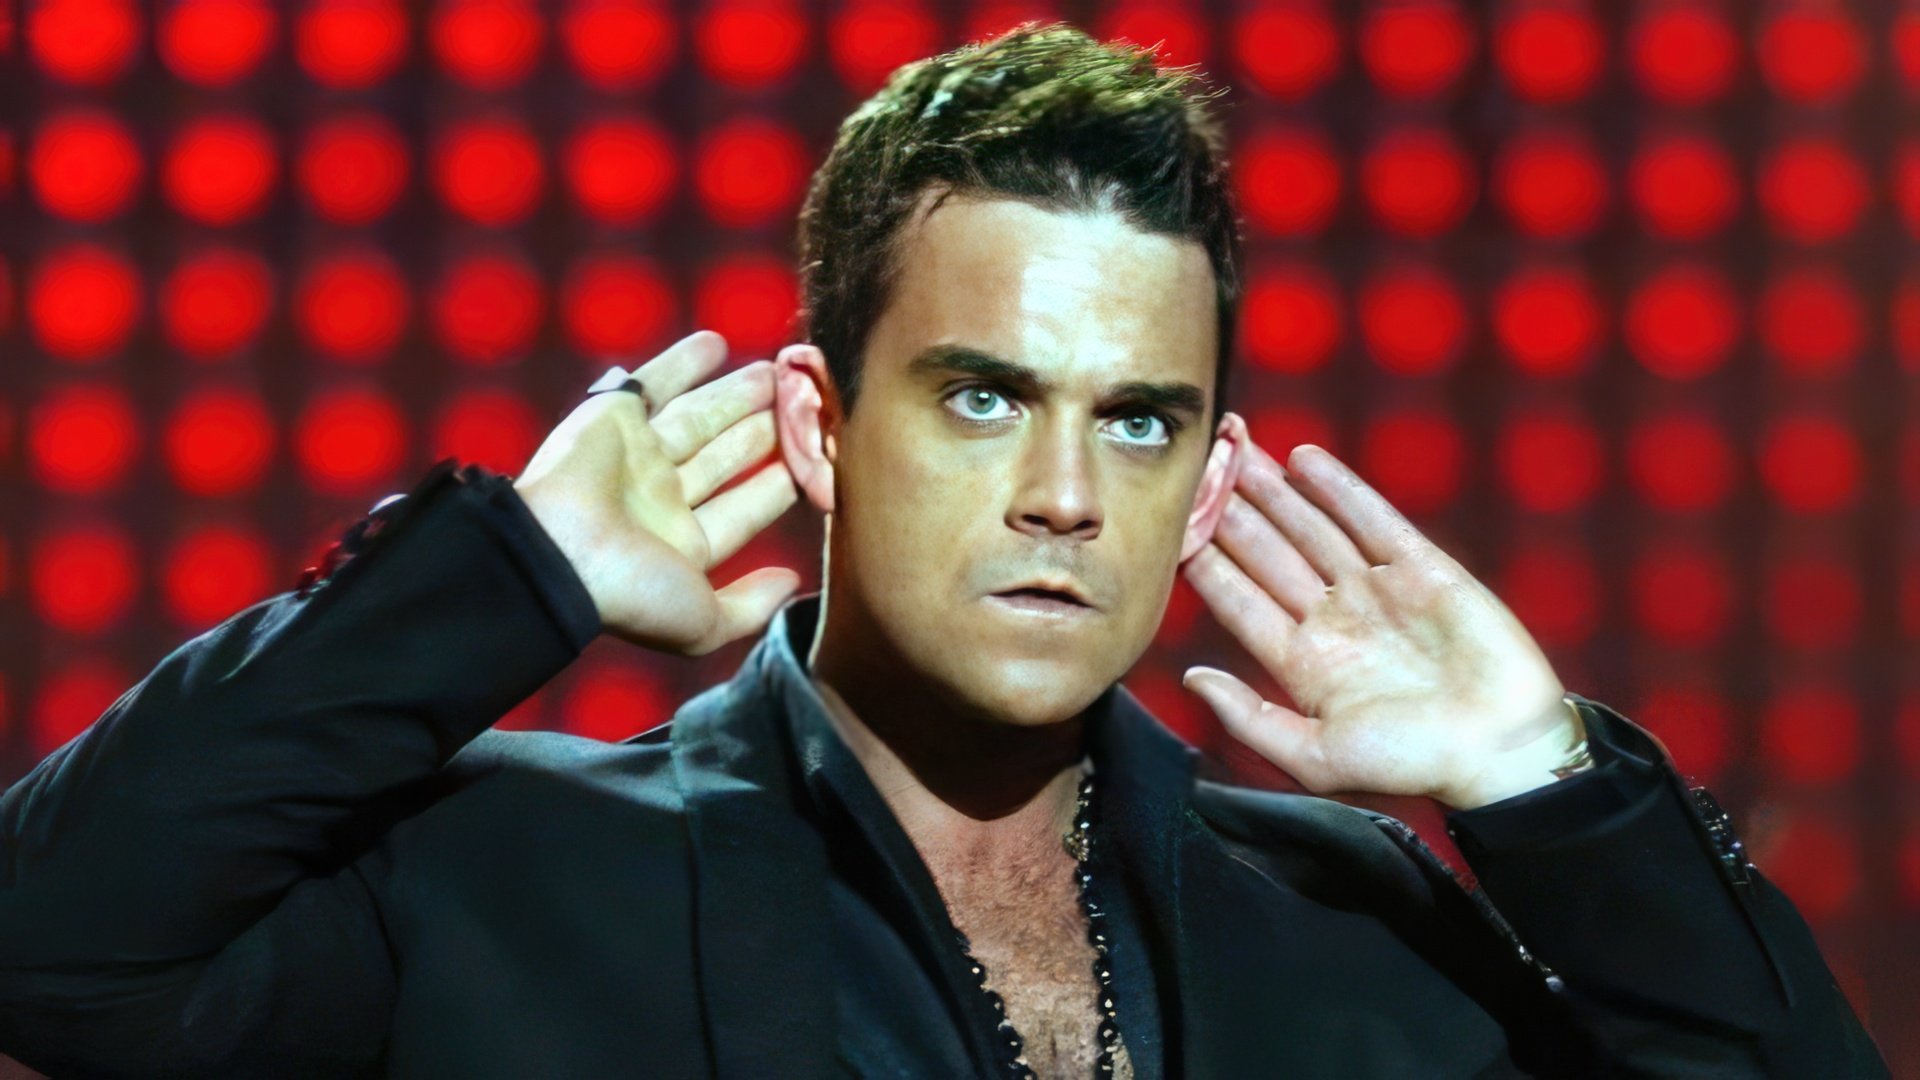 Robbie Williams signed a highly profitable contract with EMI in 2002